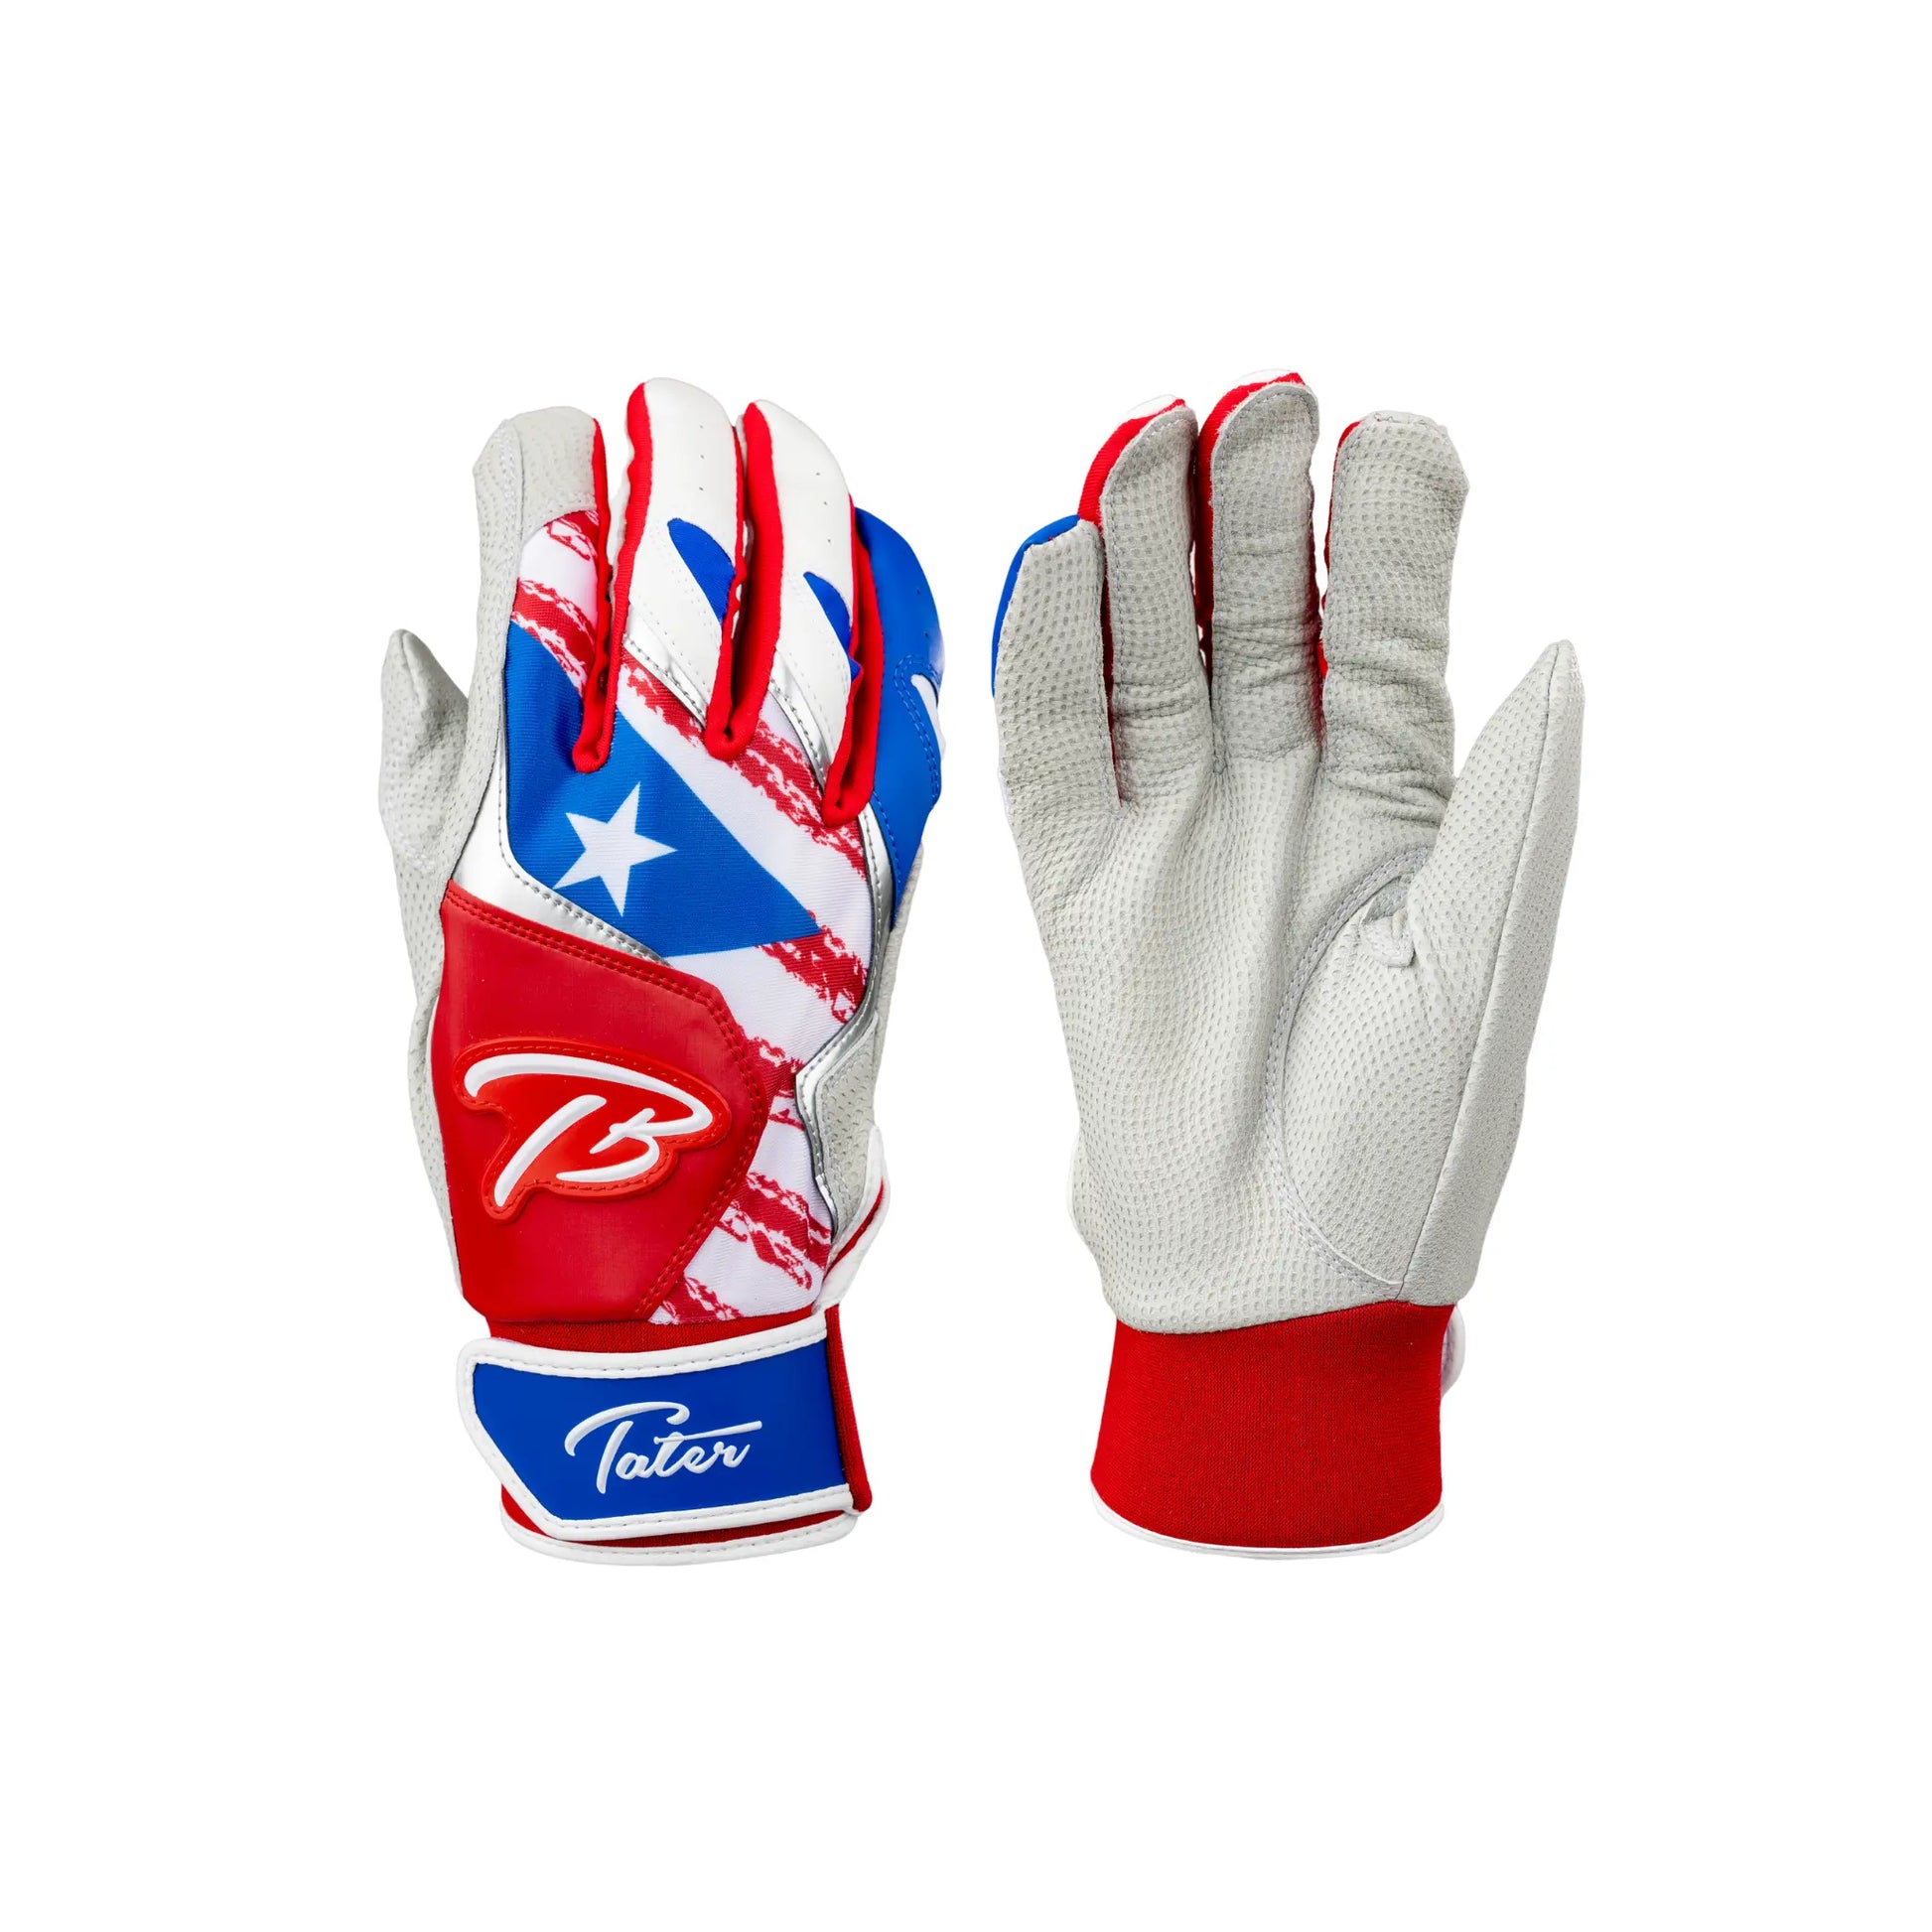 Adult-sized Tater baseball batting gloves designed with the Puerto Rican flag motif, featuring the striking red, white, and blue color scheme with a single star and the signature 'TB' logo for a bold, patriotic statement.